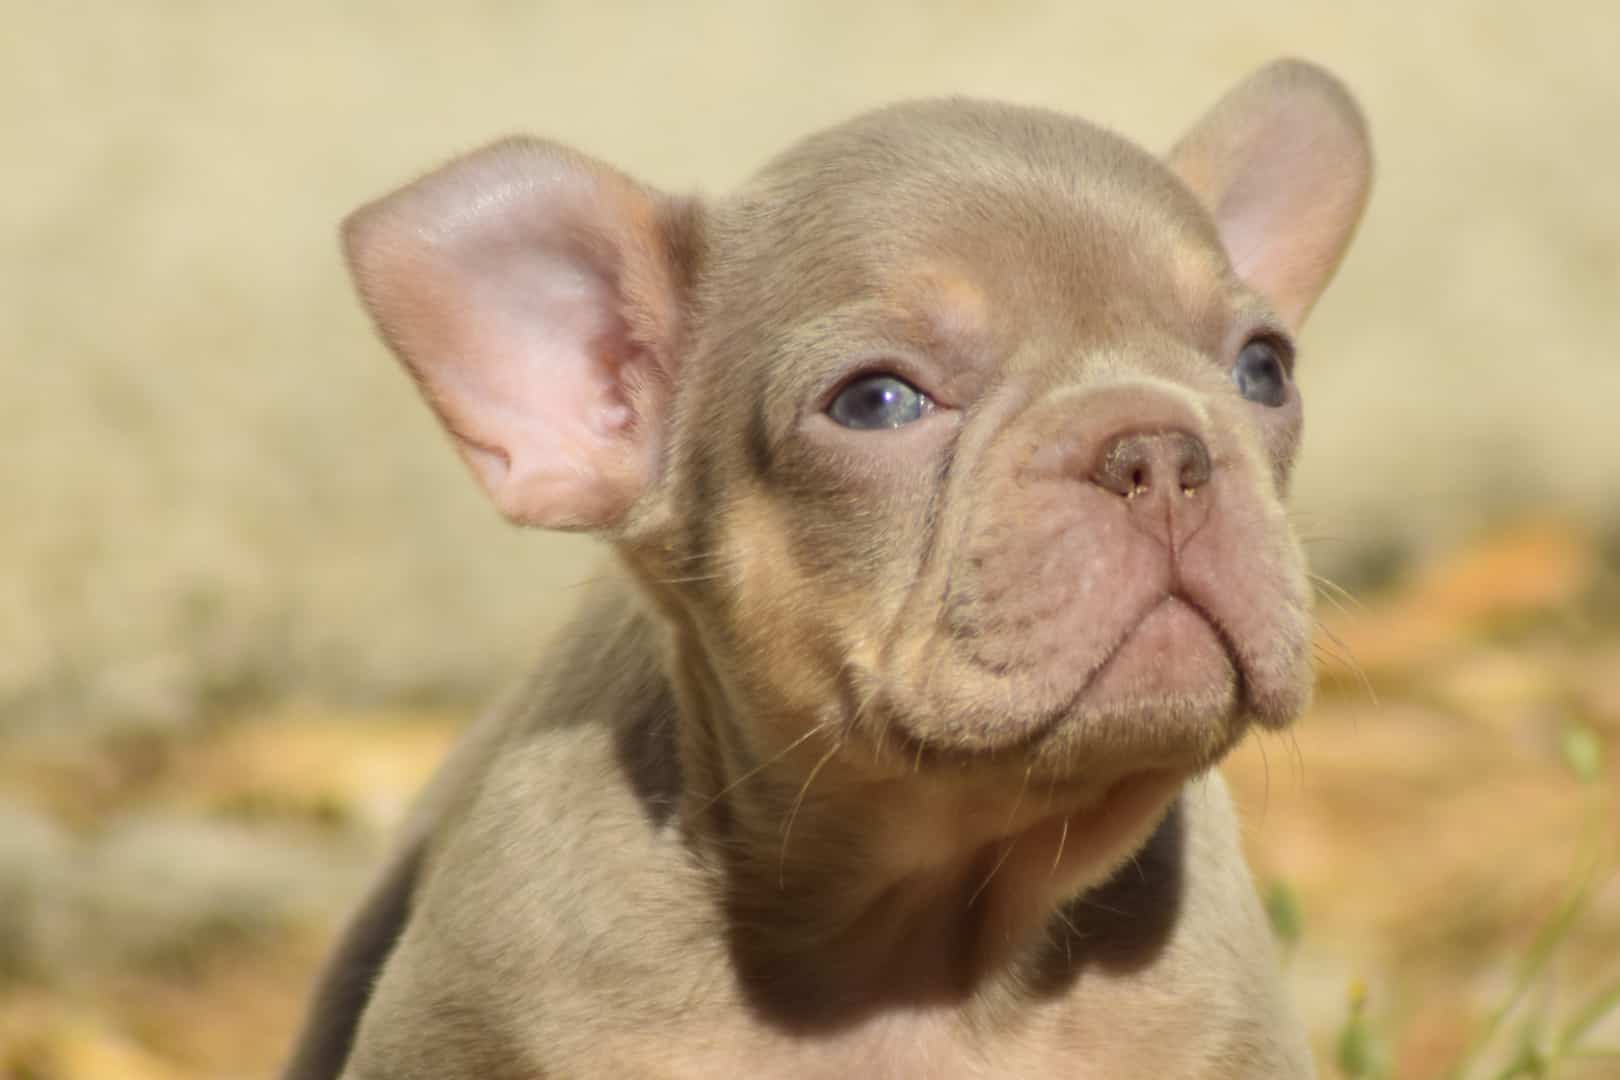 Chiot mâle bouledogue français exotique isabella tan new shade french bulldog frenchie exotic aux yeux verts